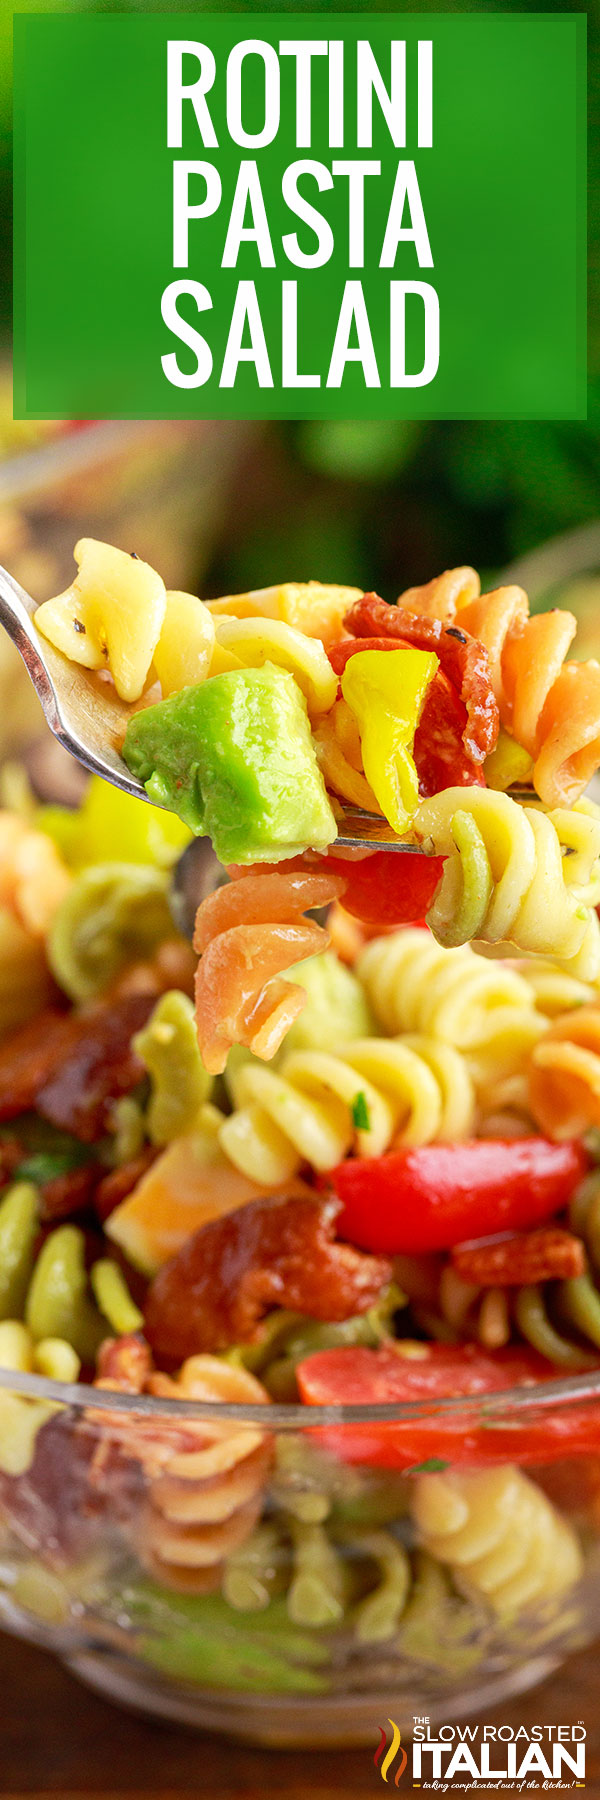 Our rotini pasta salad includes crispy bacon, veggies, avocado, cheese and tangy Ranchito dressing. Make this easy pasta salad recipe soon! 